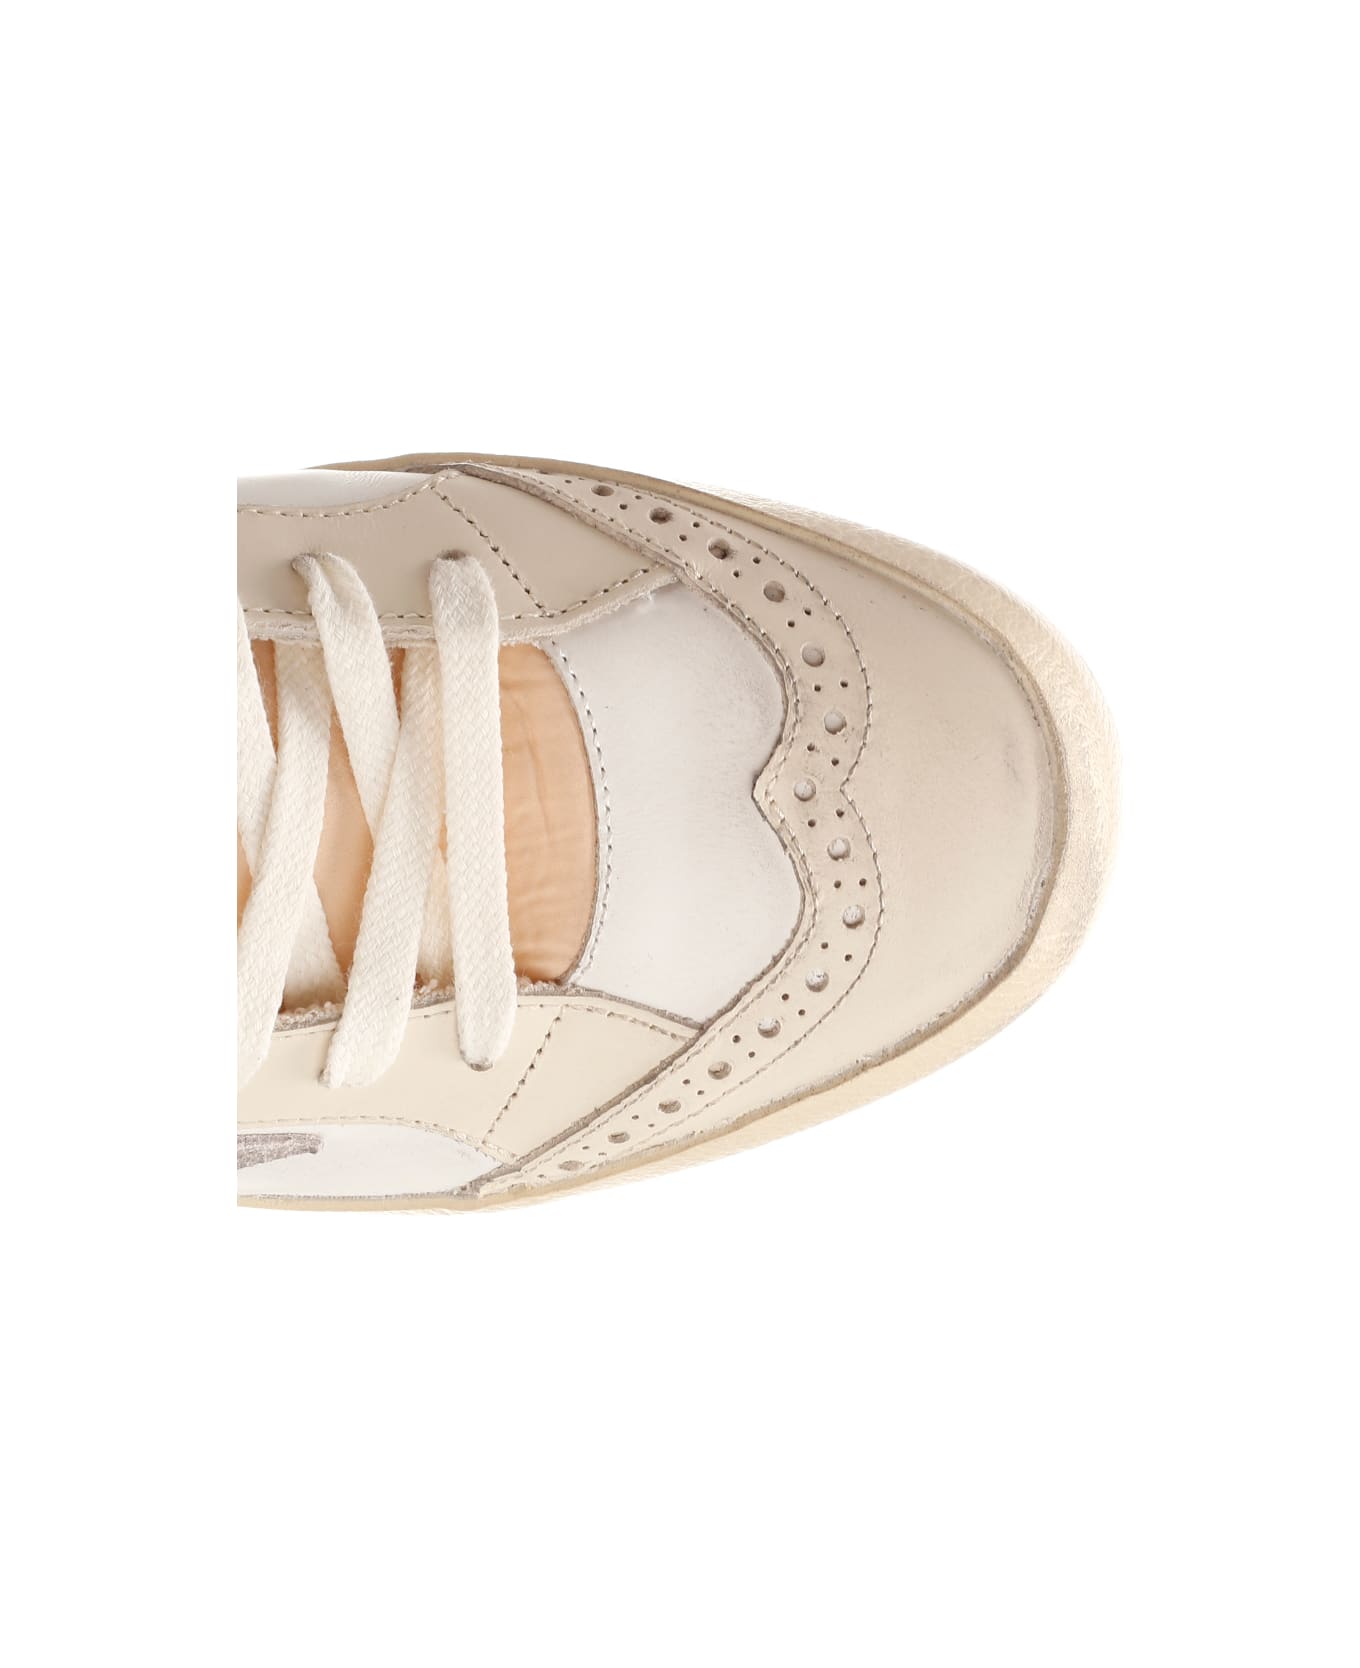 Golden Goose Mid Star Sneakers - White/Lilac/Grey/Gold